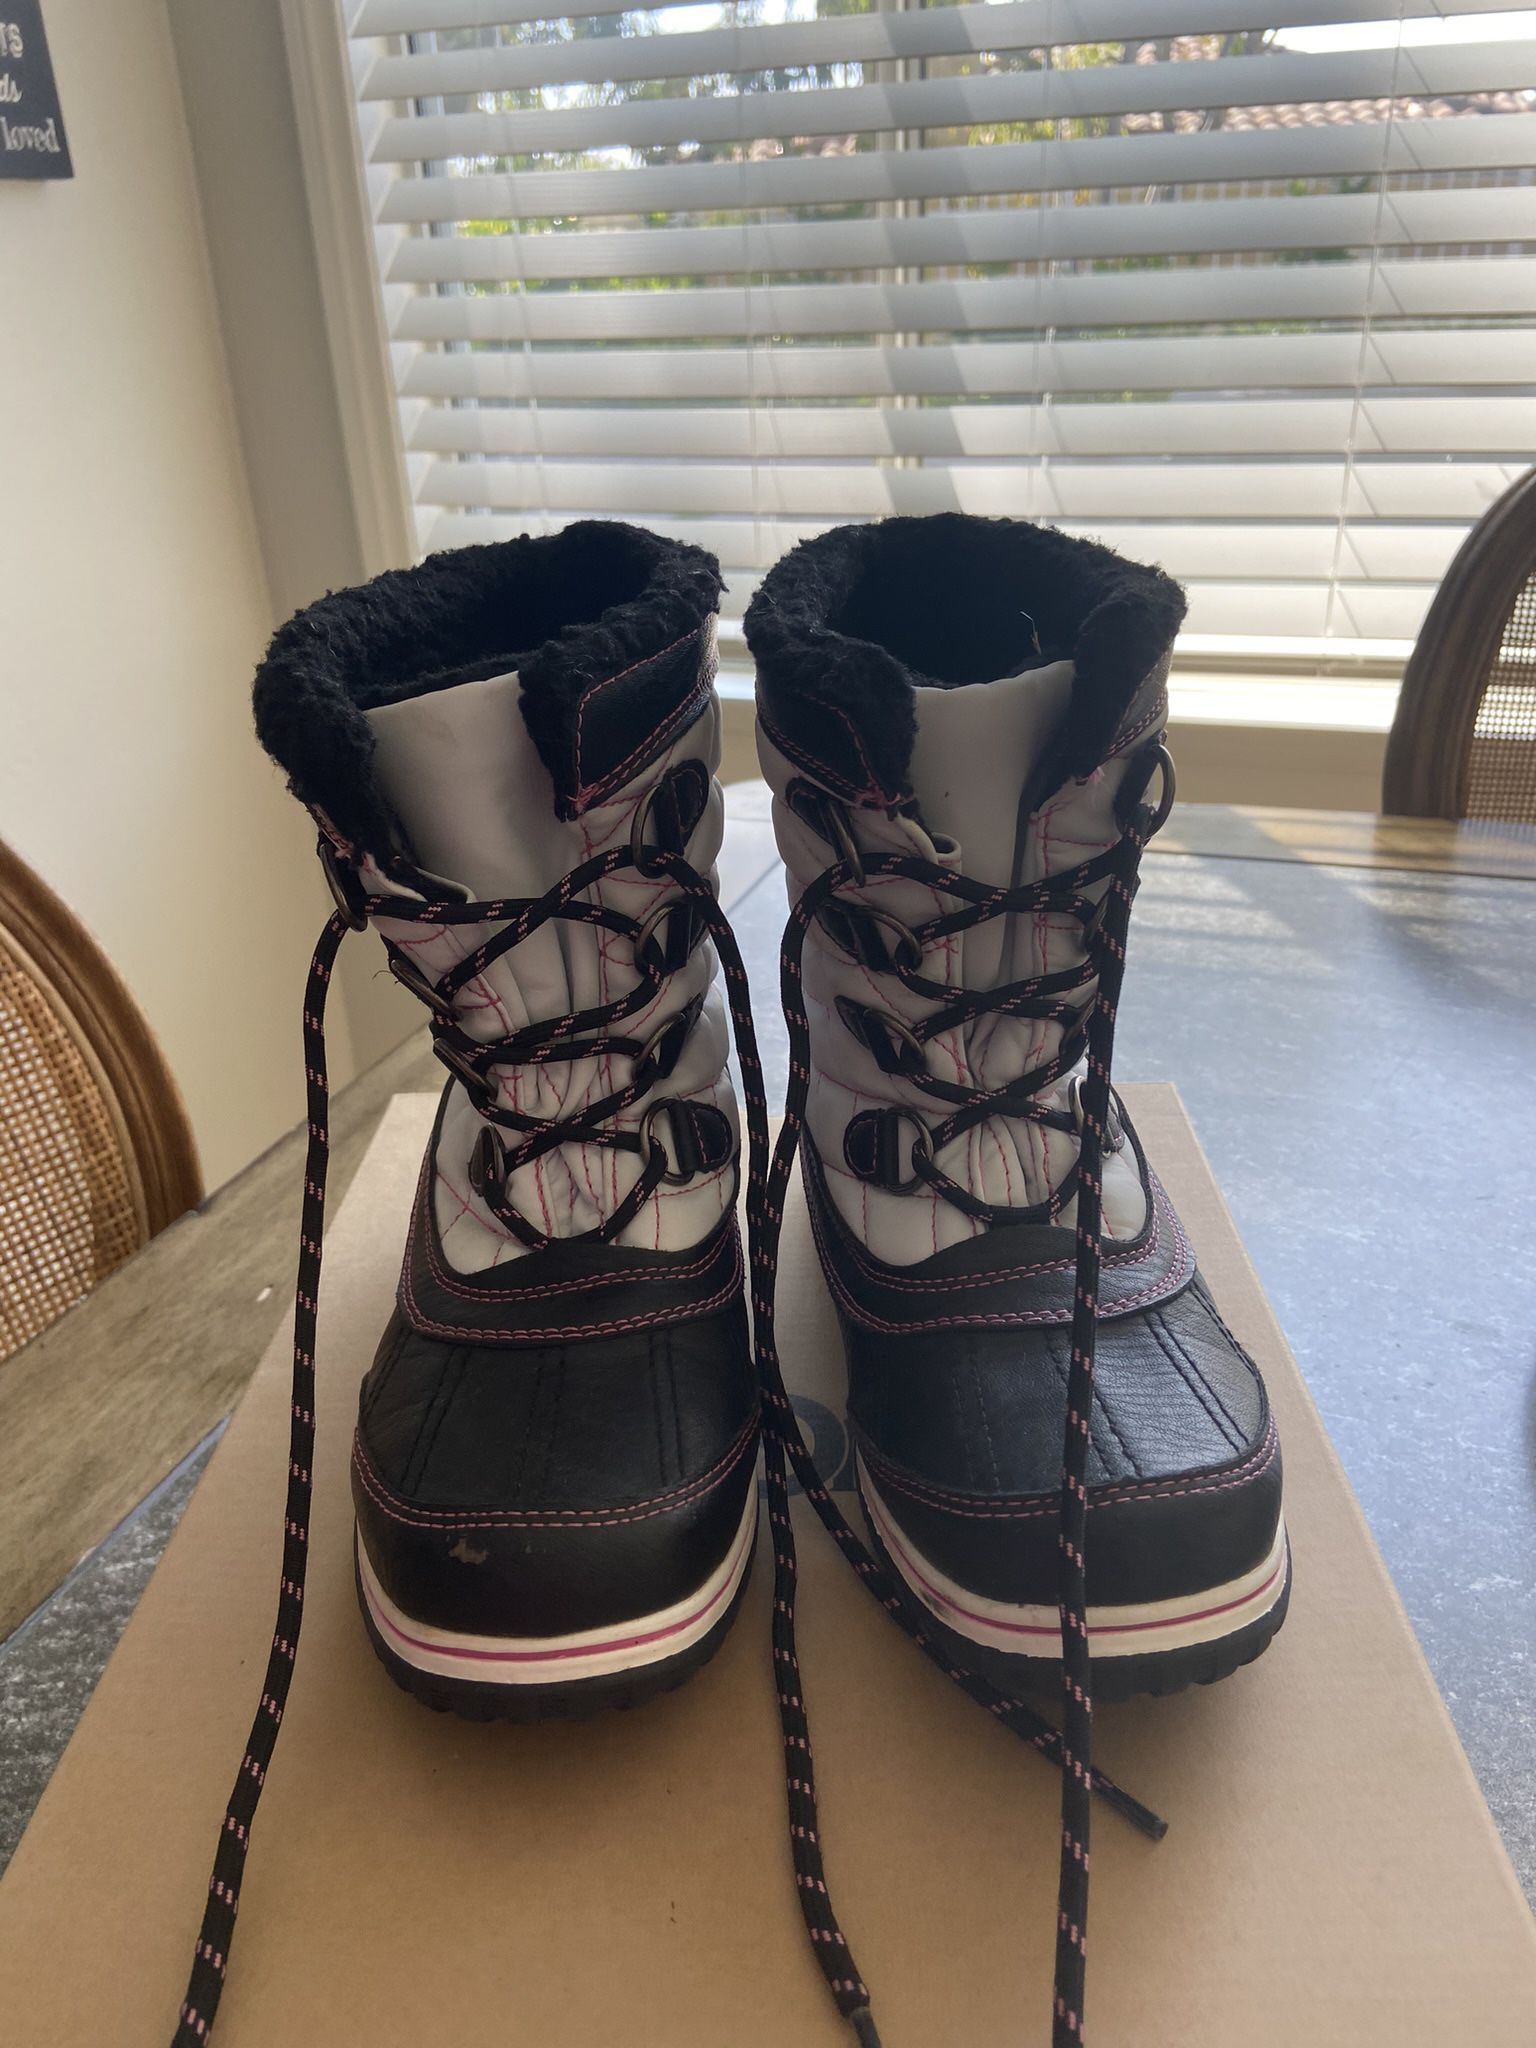 Girl Snow Boots Size 3